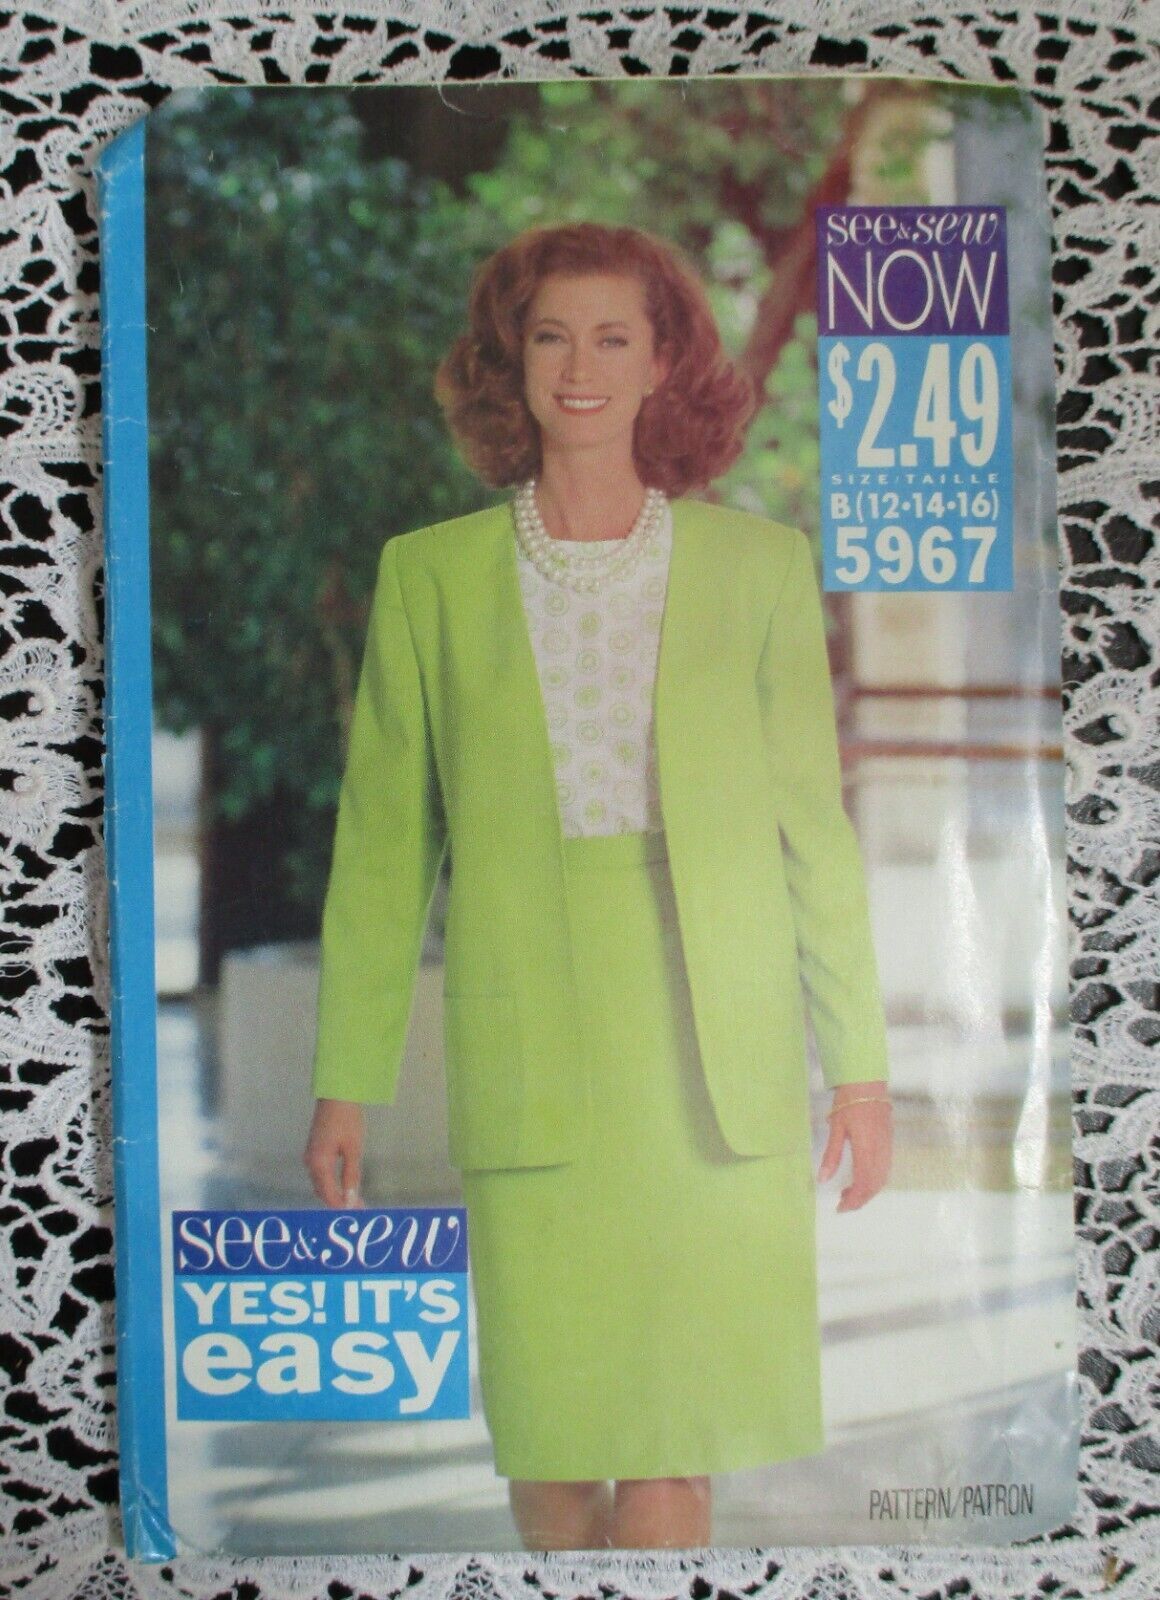 See & Sew by Butterick 5967 Misses Jacket, Skirt & Top Size 12,14,16 NEW - $7.56